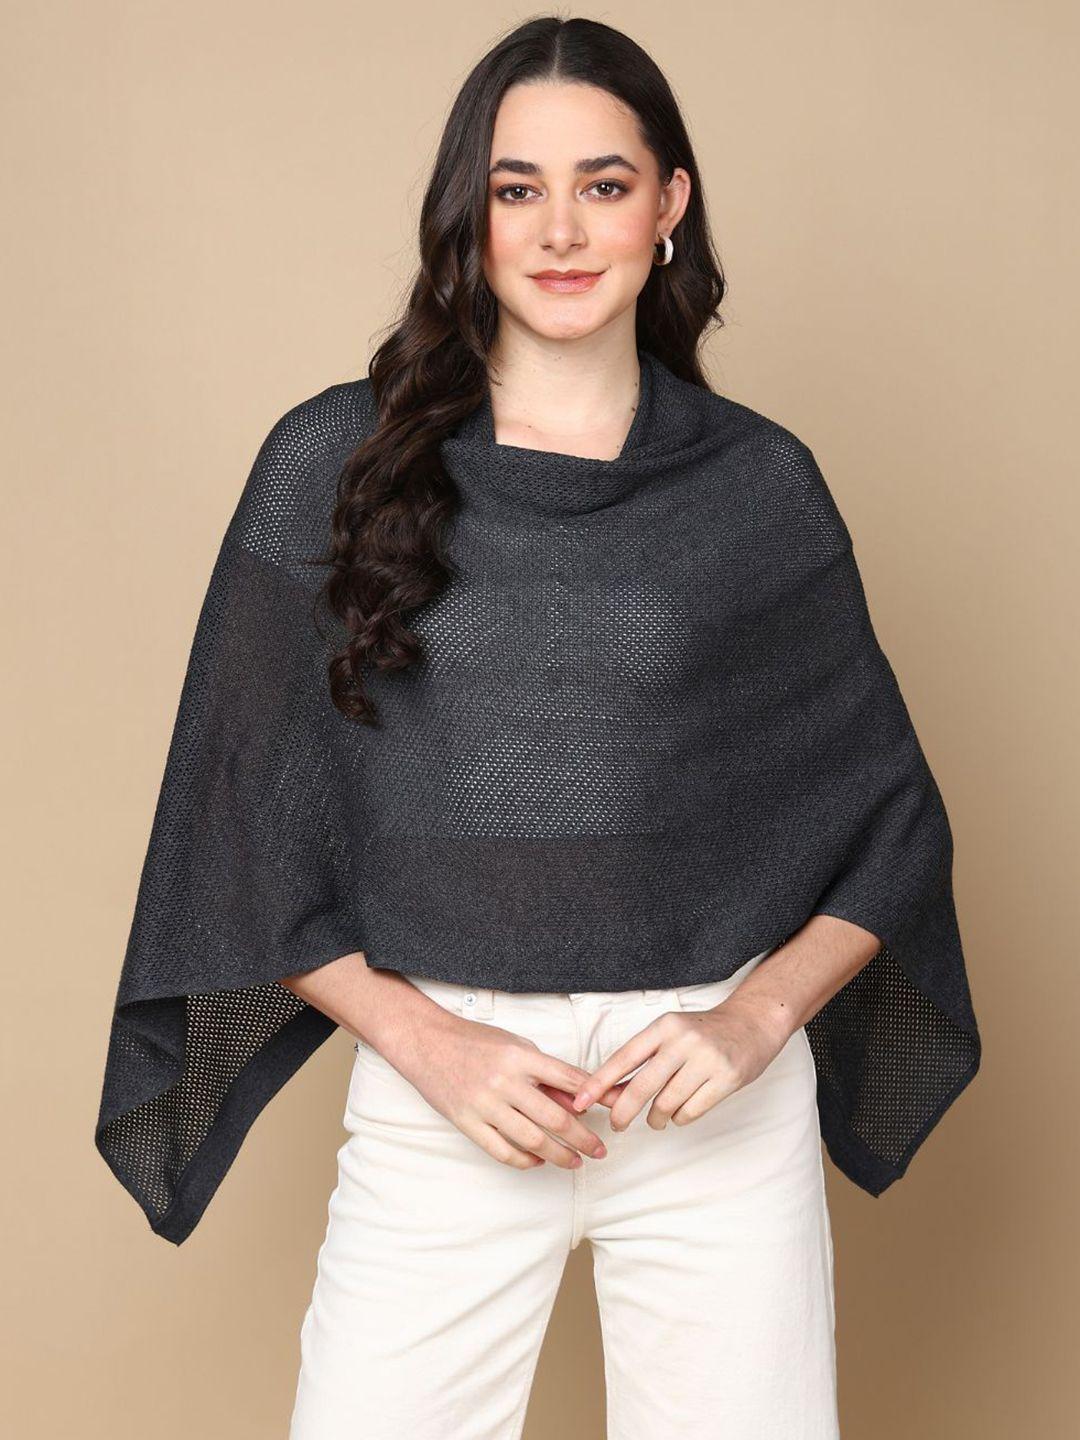 house of zelena open knit self design maternity poncho sweater